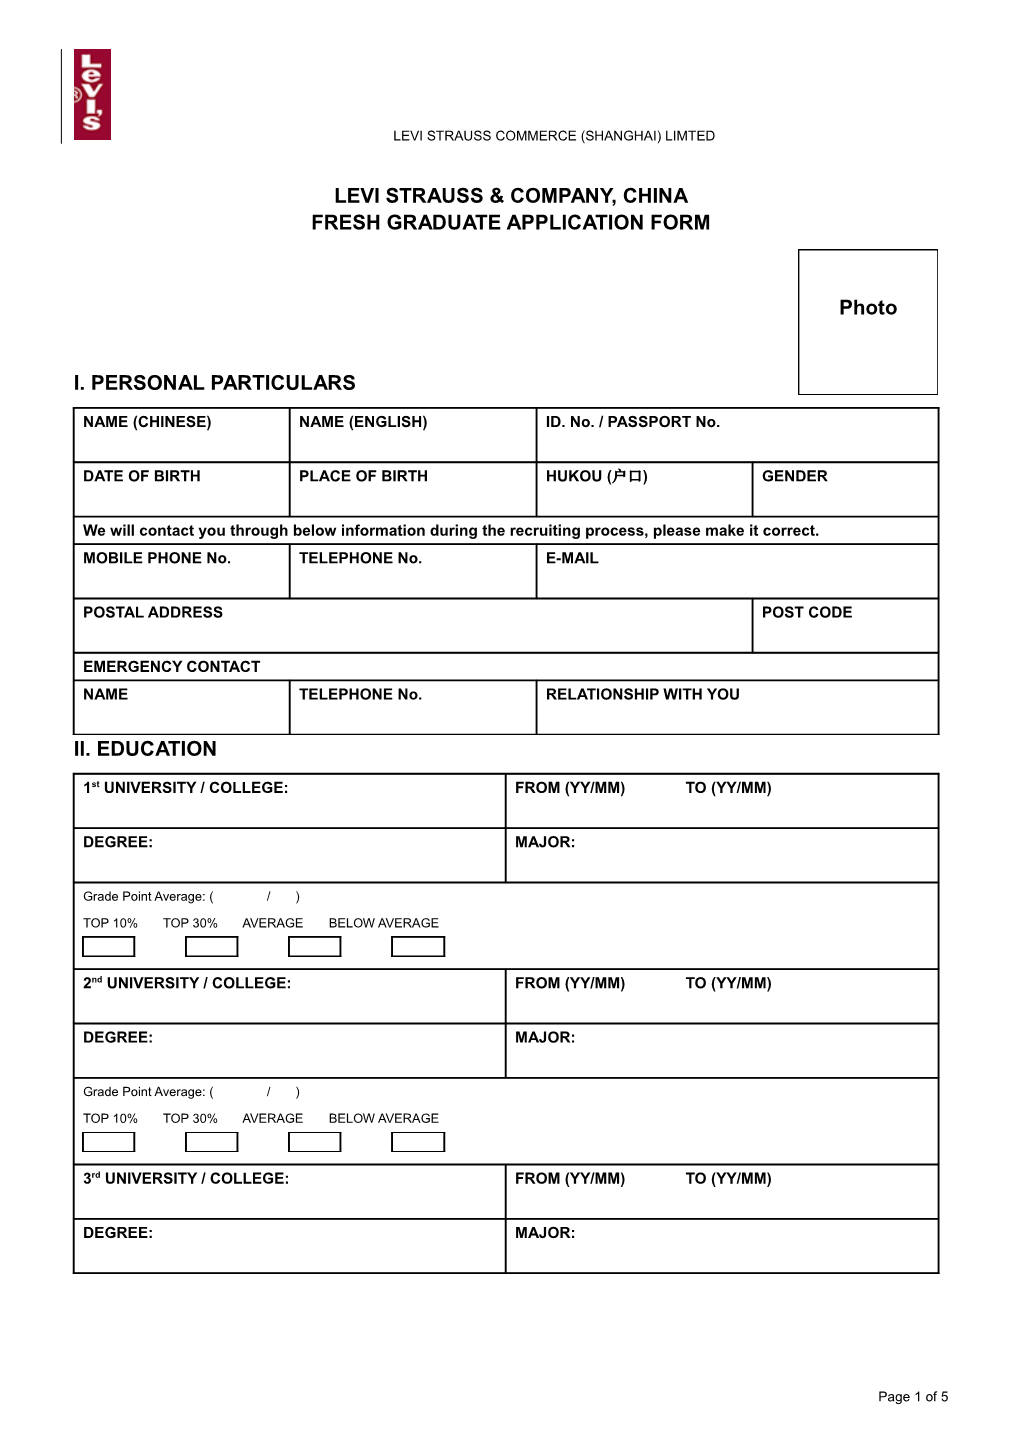 Levi Strauss Commerce Application Form